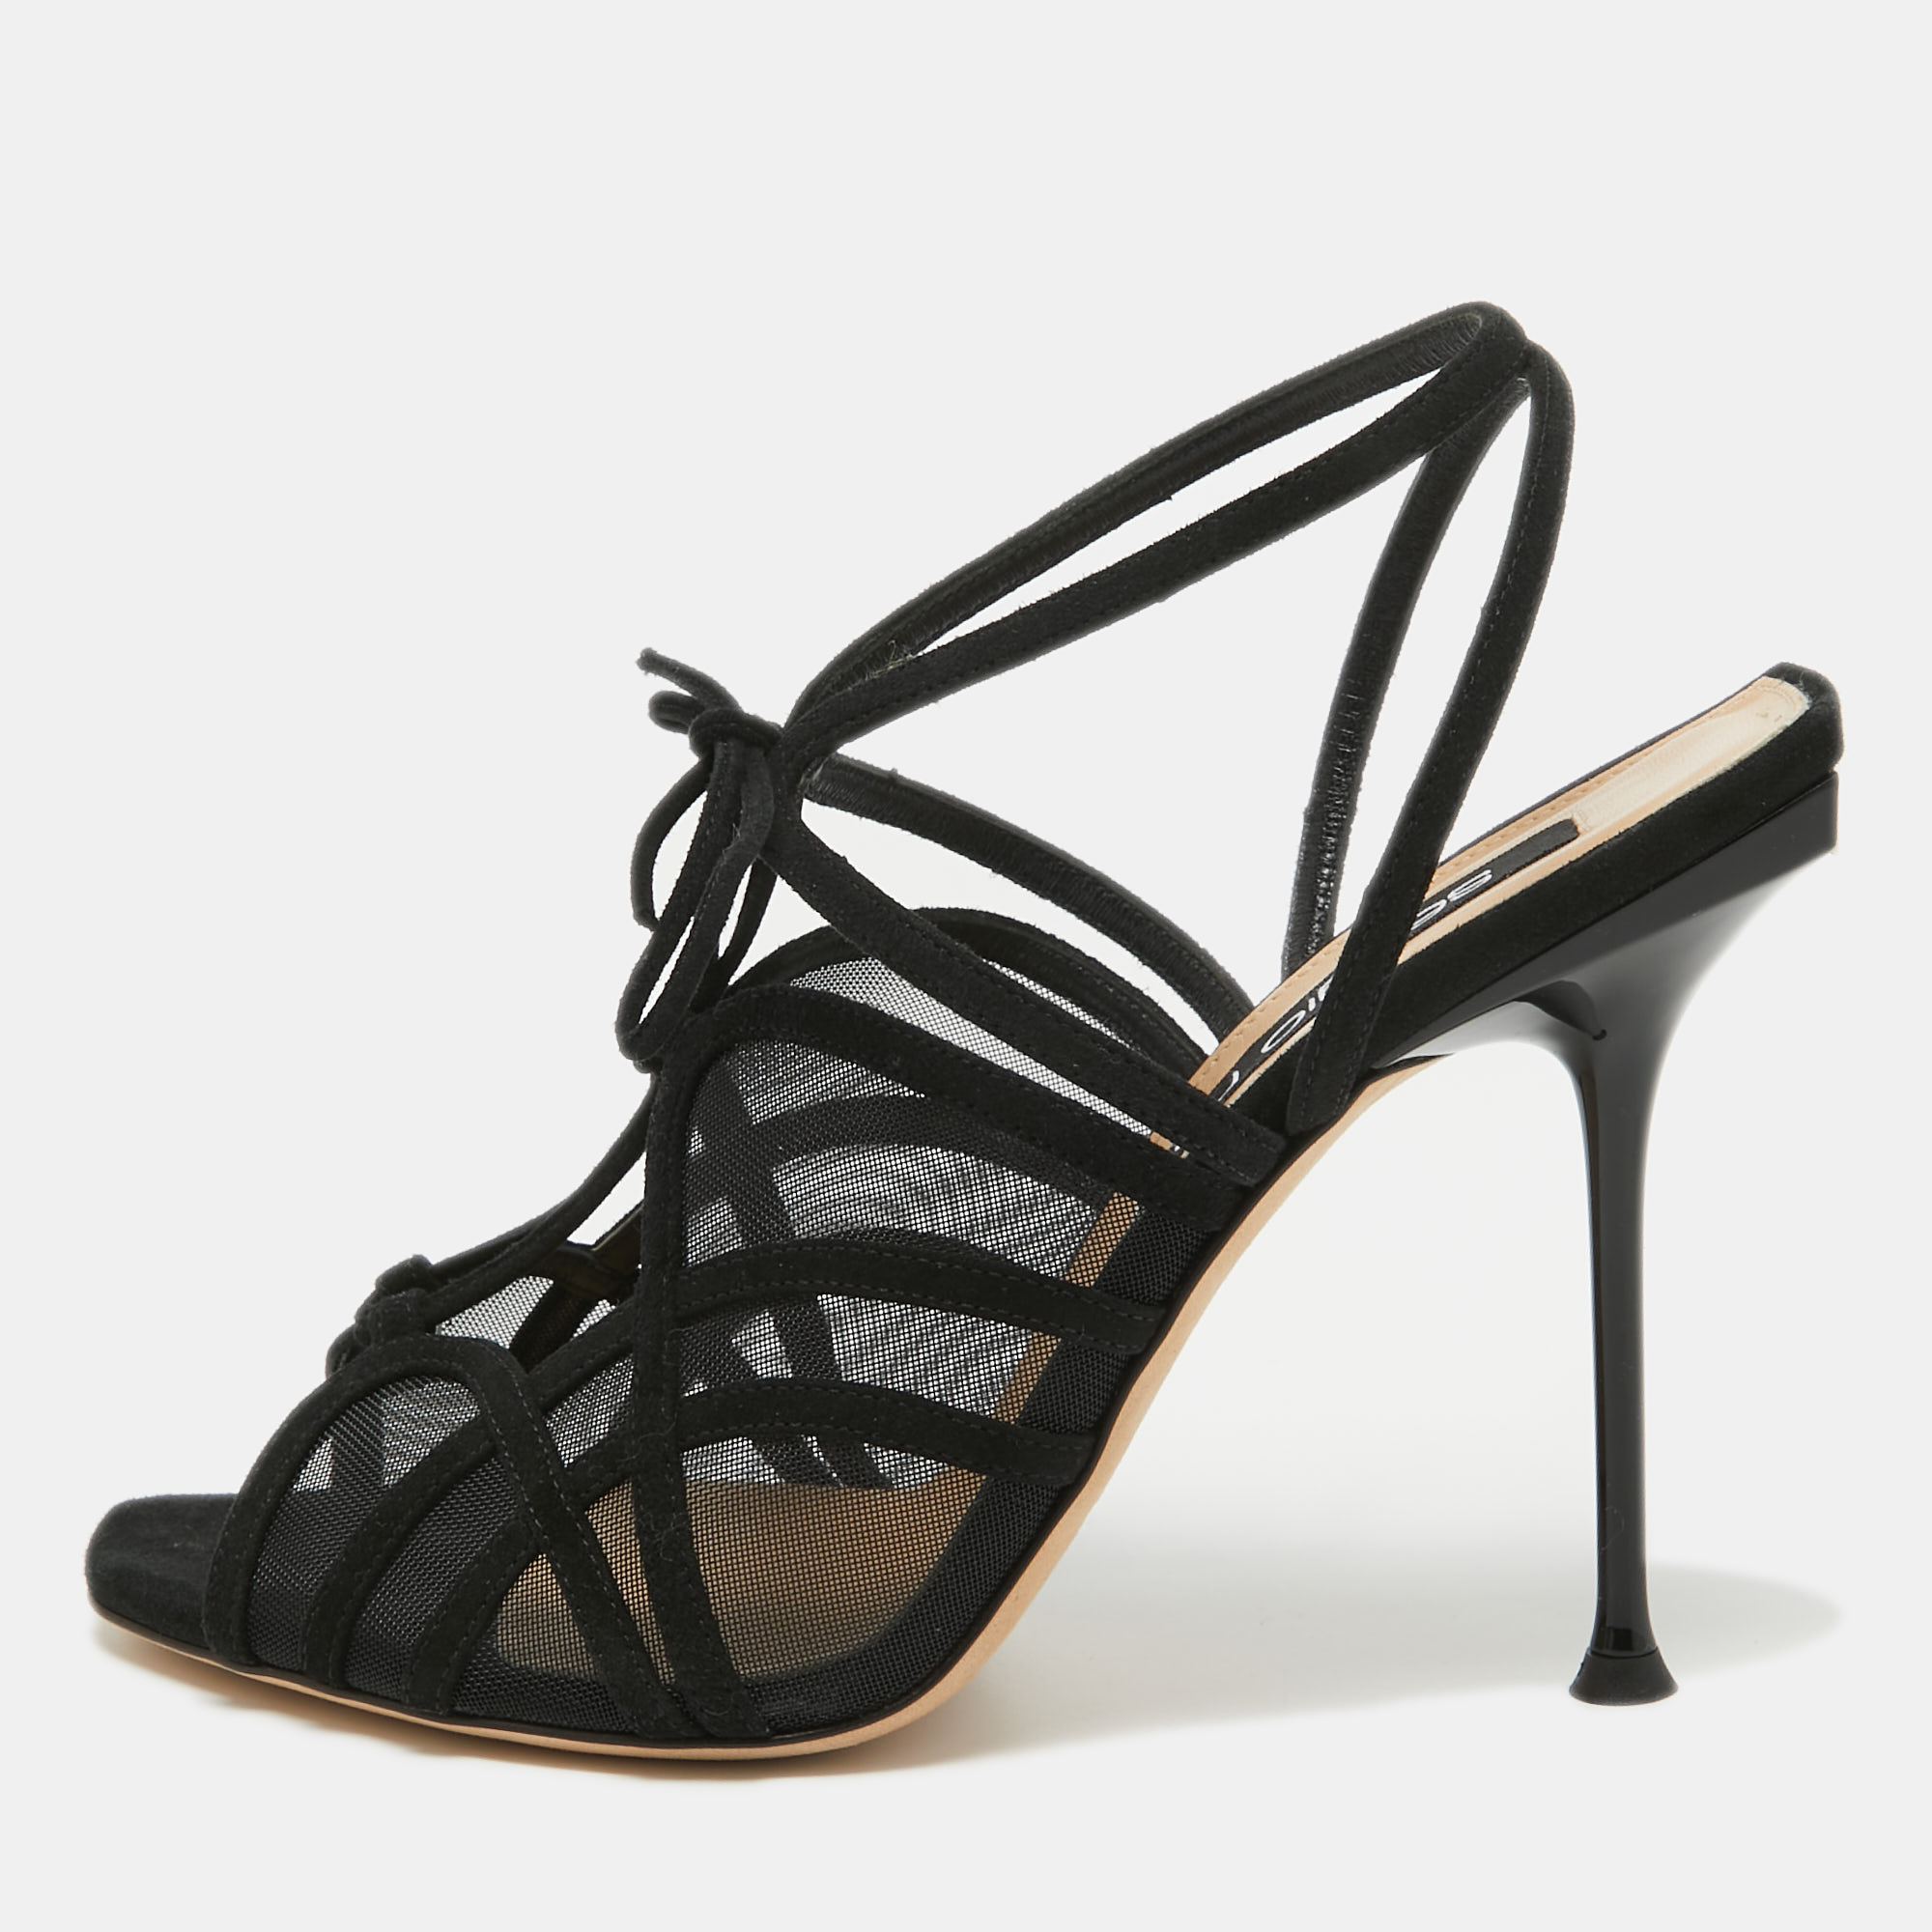 Sergio Rossi Black Suede And Mesh Ankle Strap Sandals Size 40